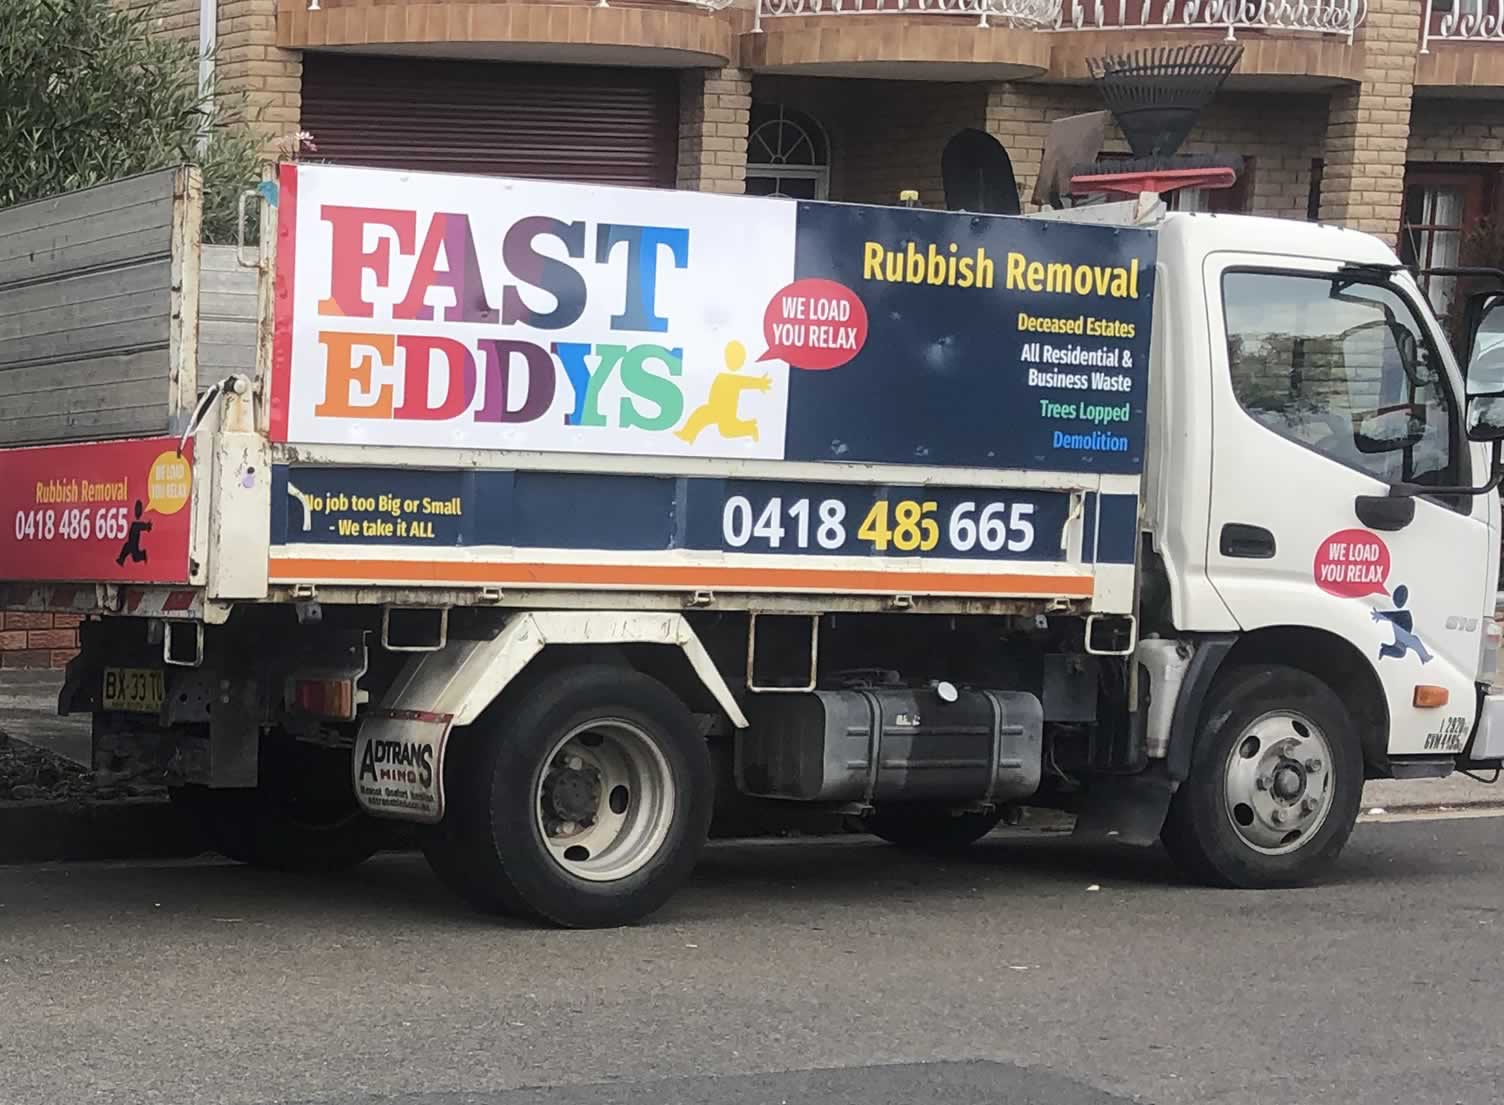 Do The Right Thing - Don't contribute to Illegal Dumping:image fast-eddys-sydney-rubbish-removal-lr